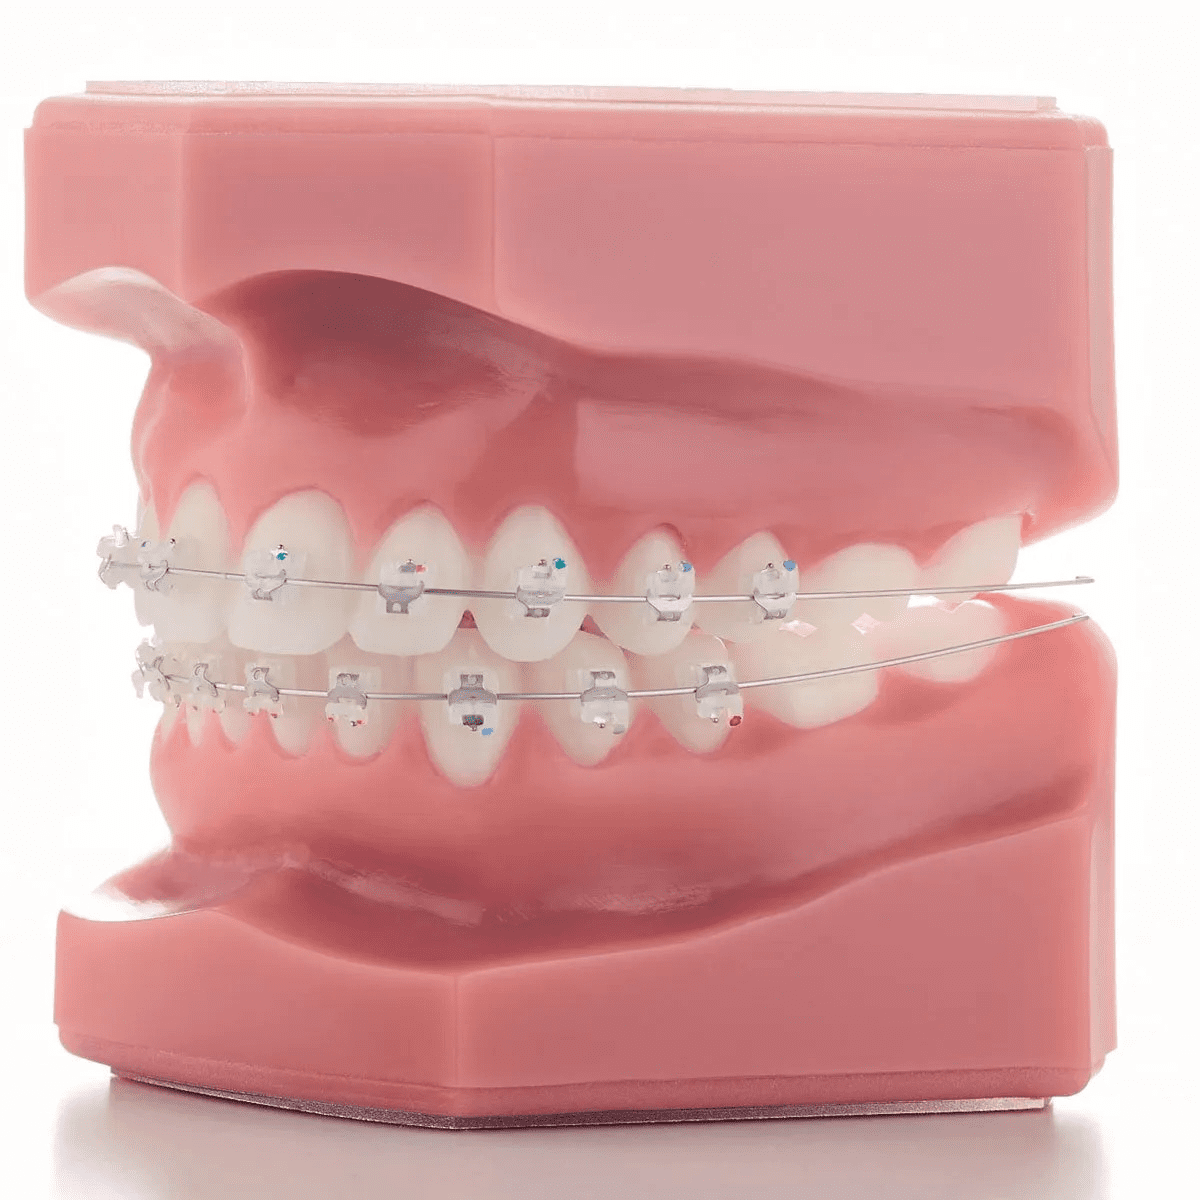 Our GC Orthodontic self-ligating ceramic braces are the smallest in the world.